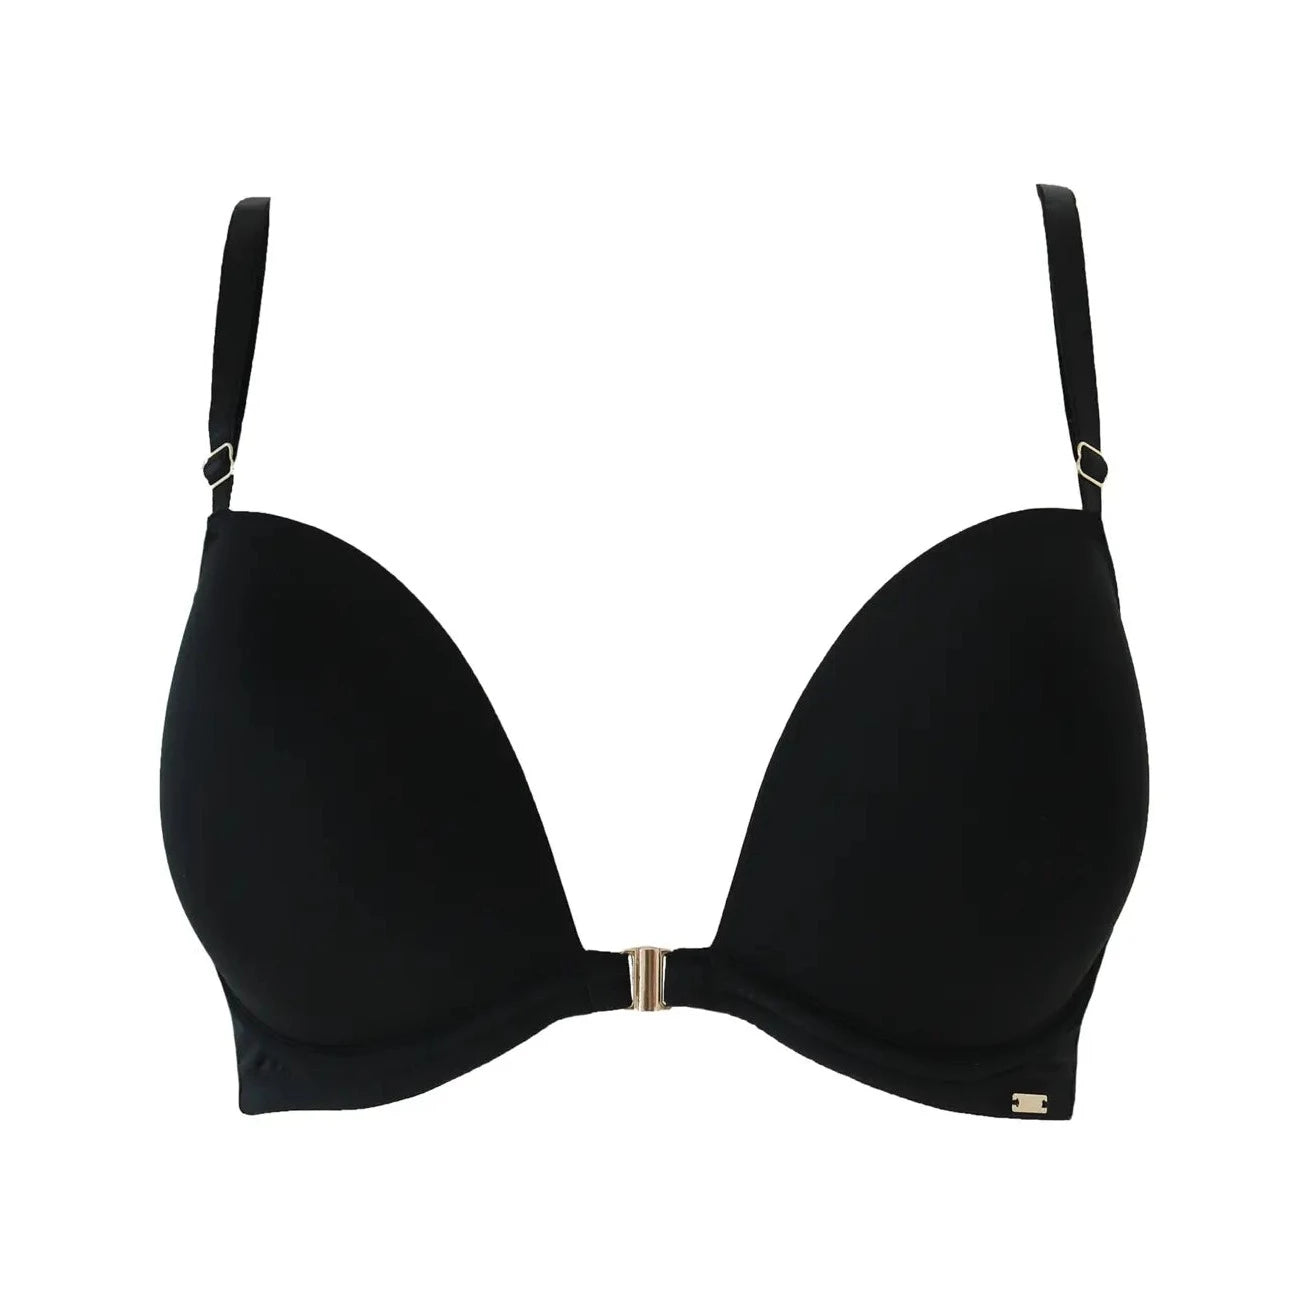 Say Oui to French Brassieres #shopherroom